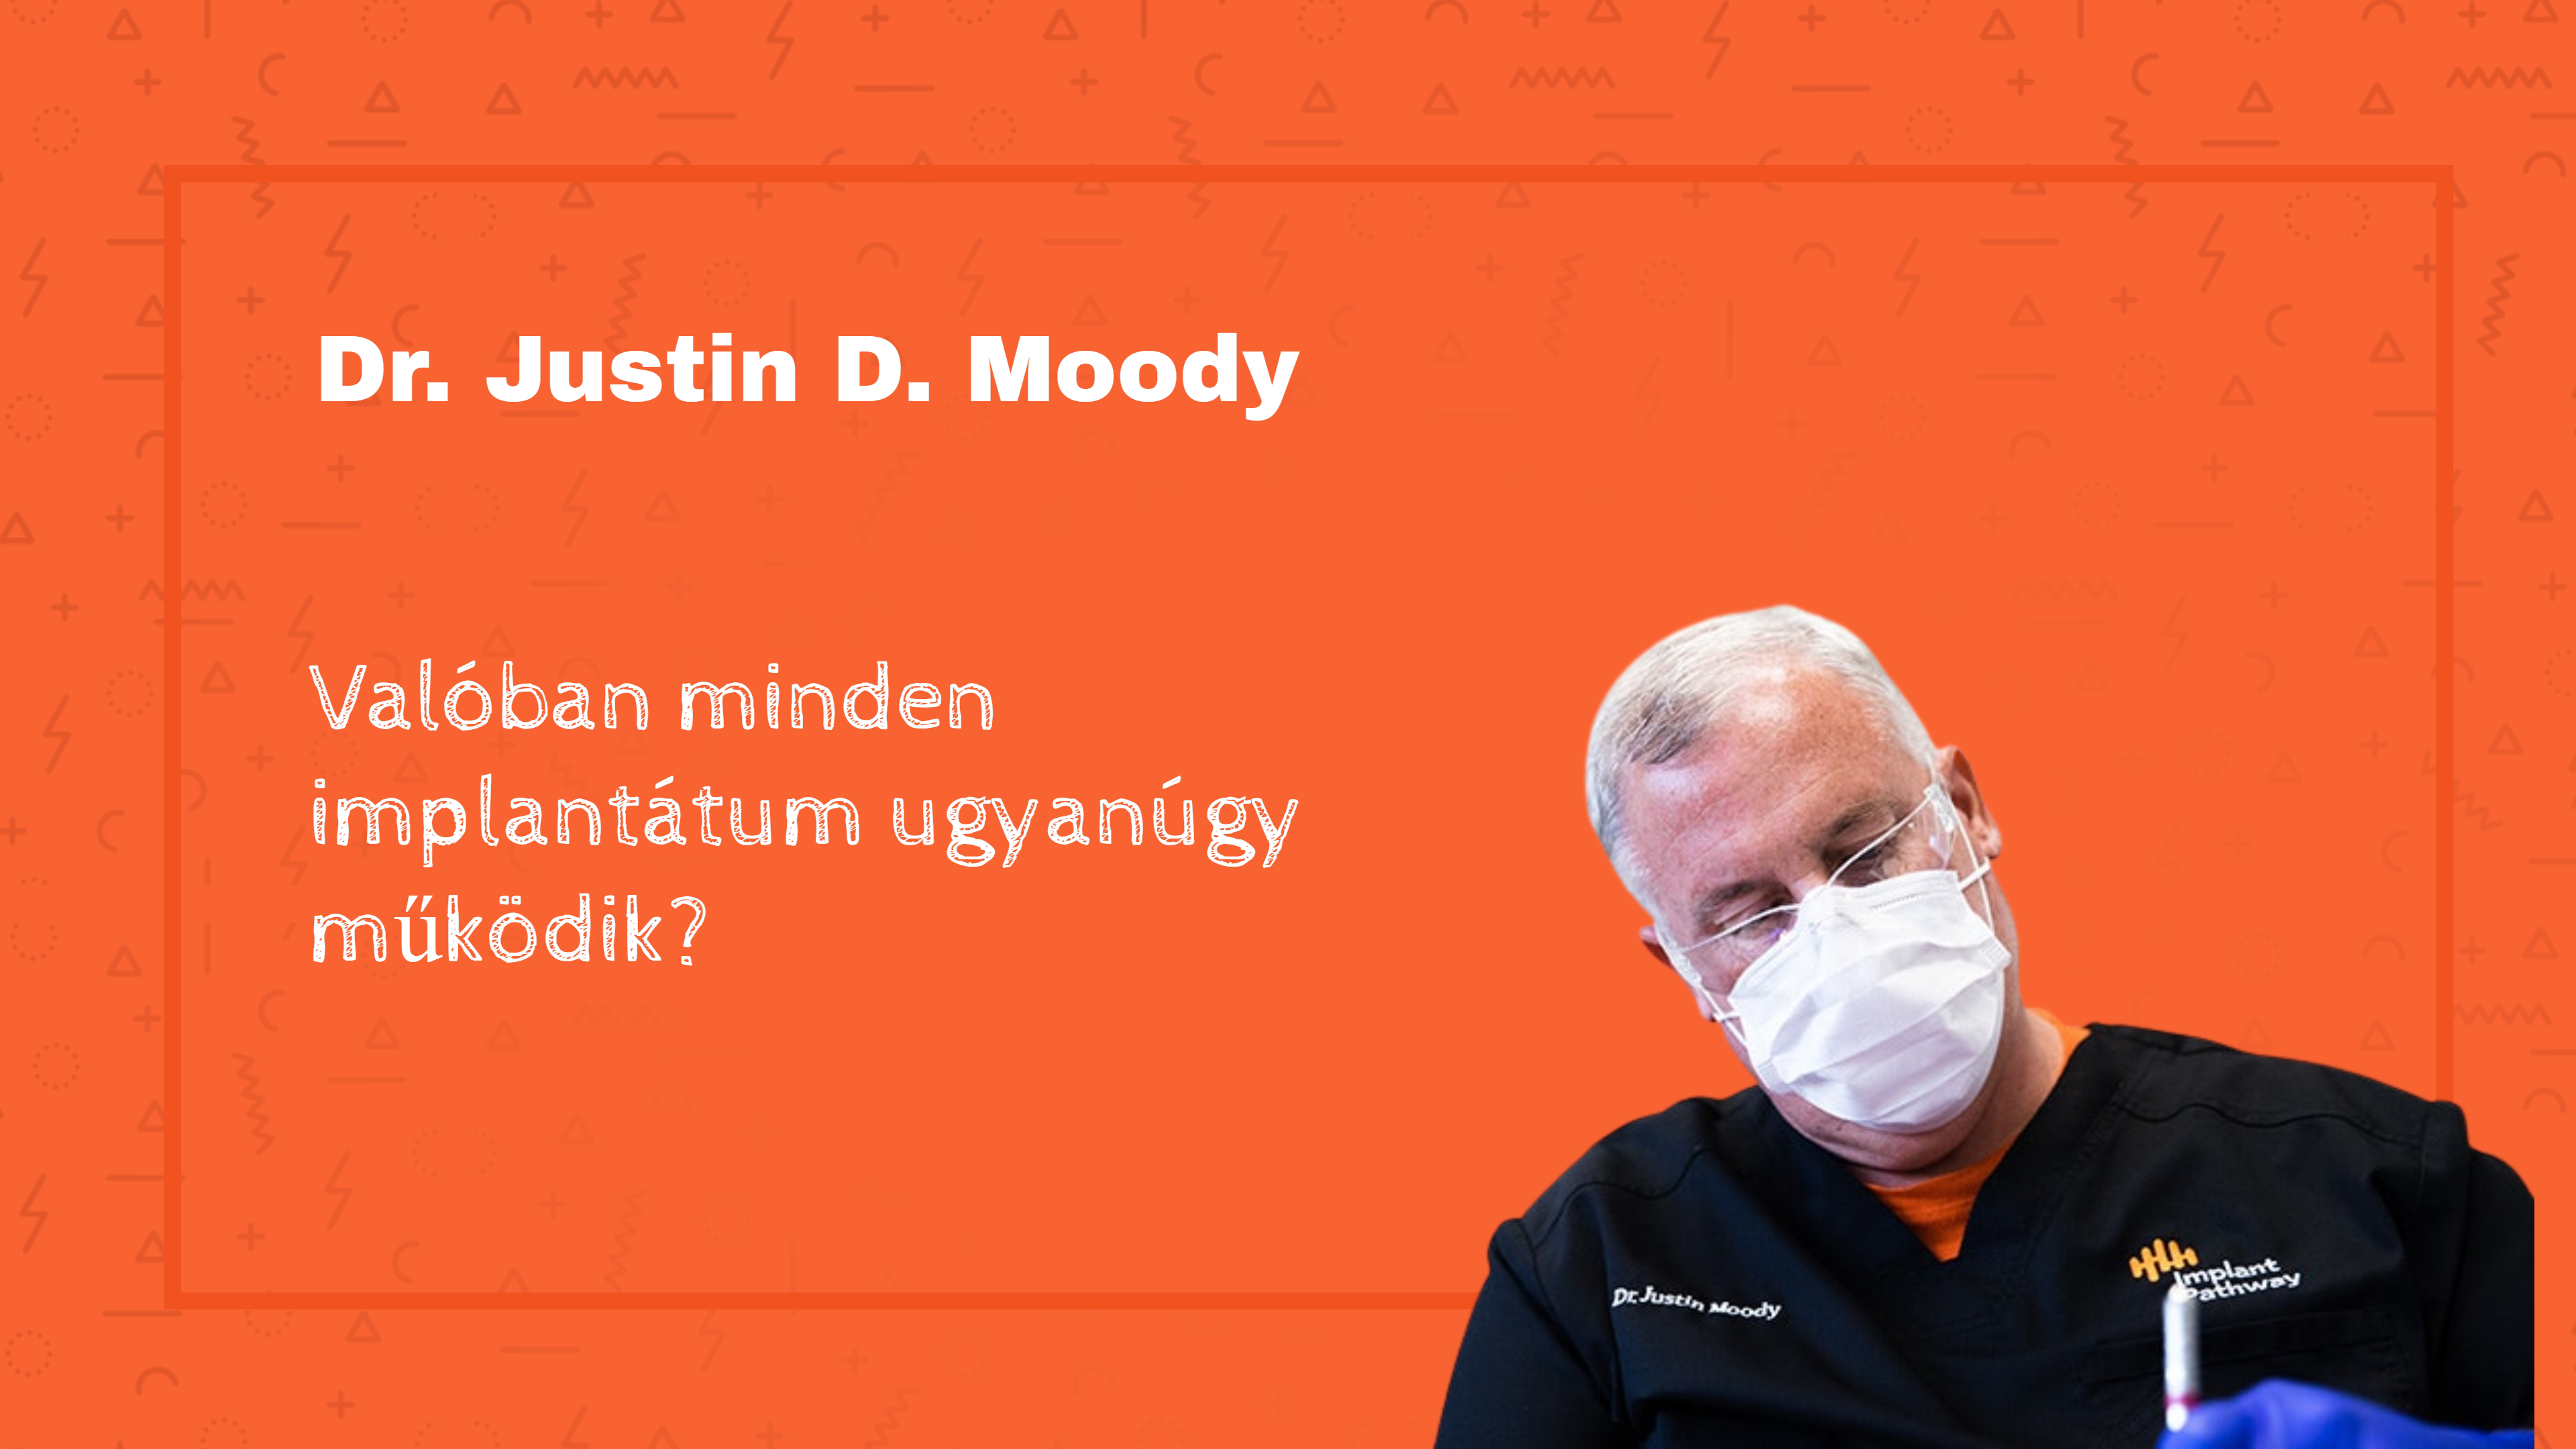 Dr. Justin D. Moody discusses how implant technology continues to evolve